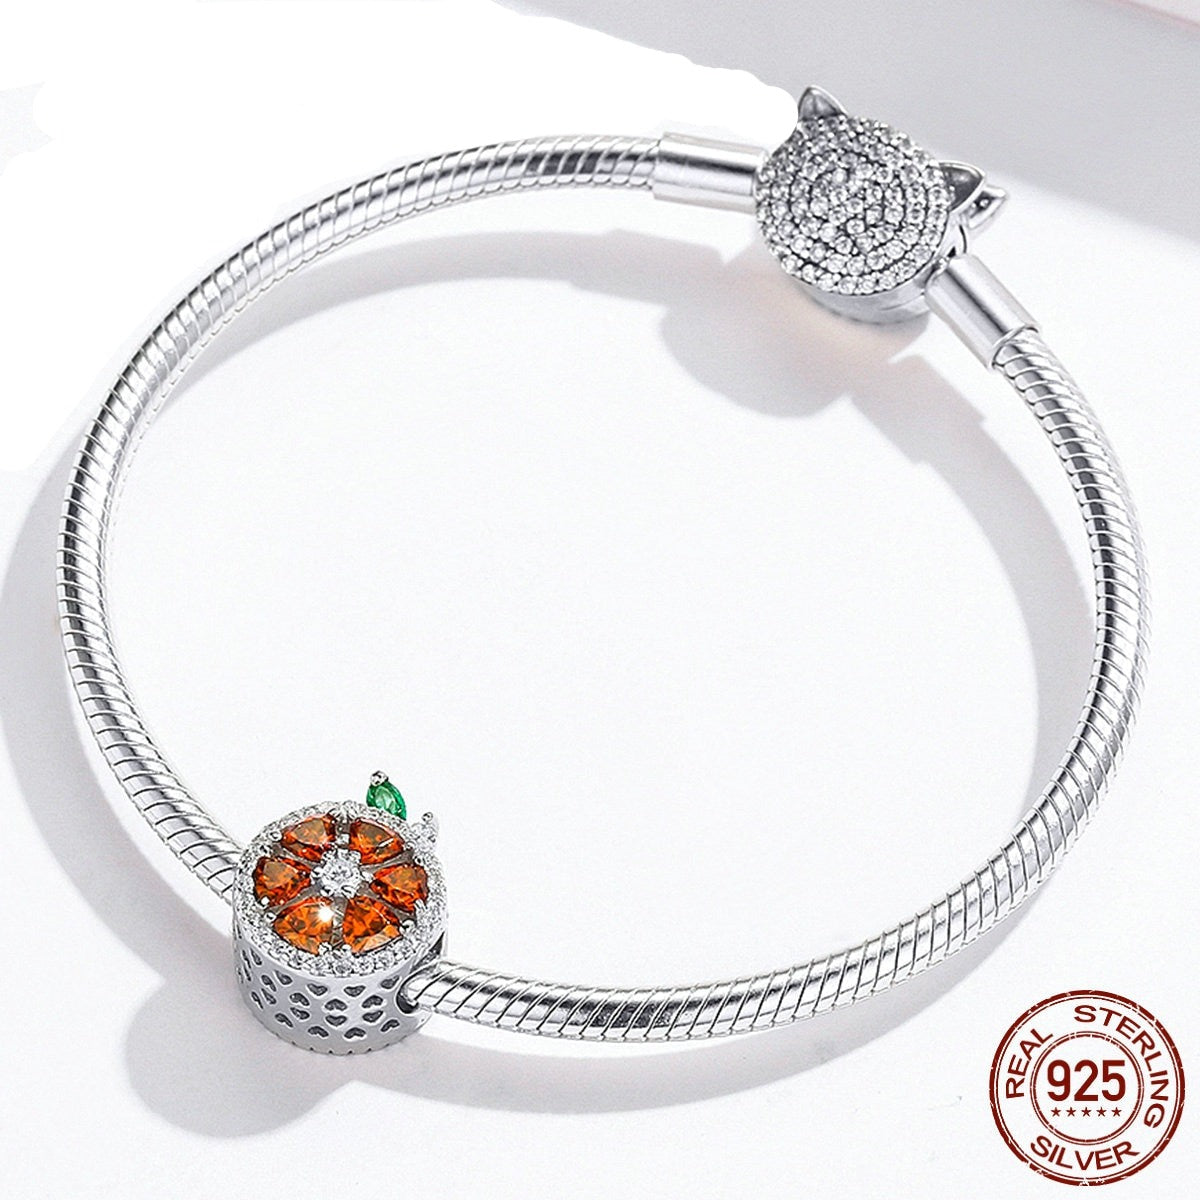 Grapefruit Charm in 925 Silver and Zircons